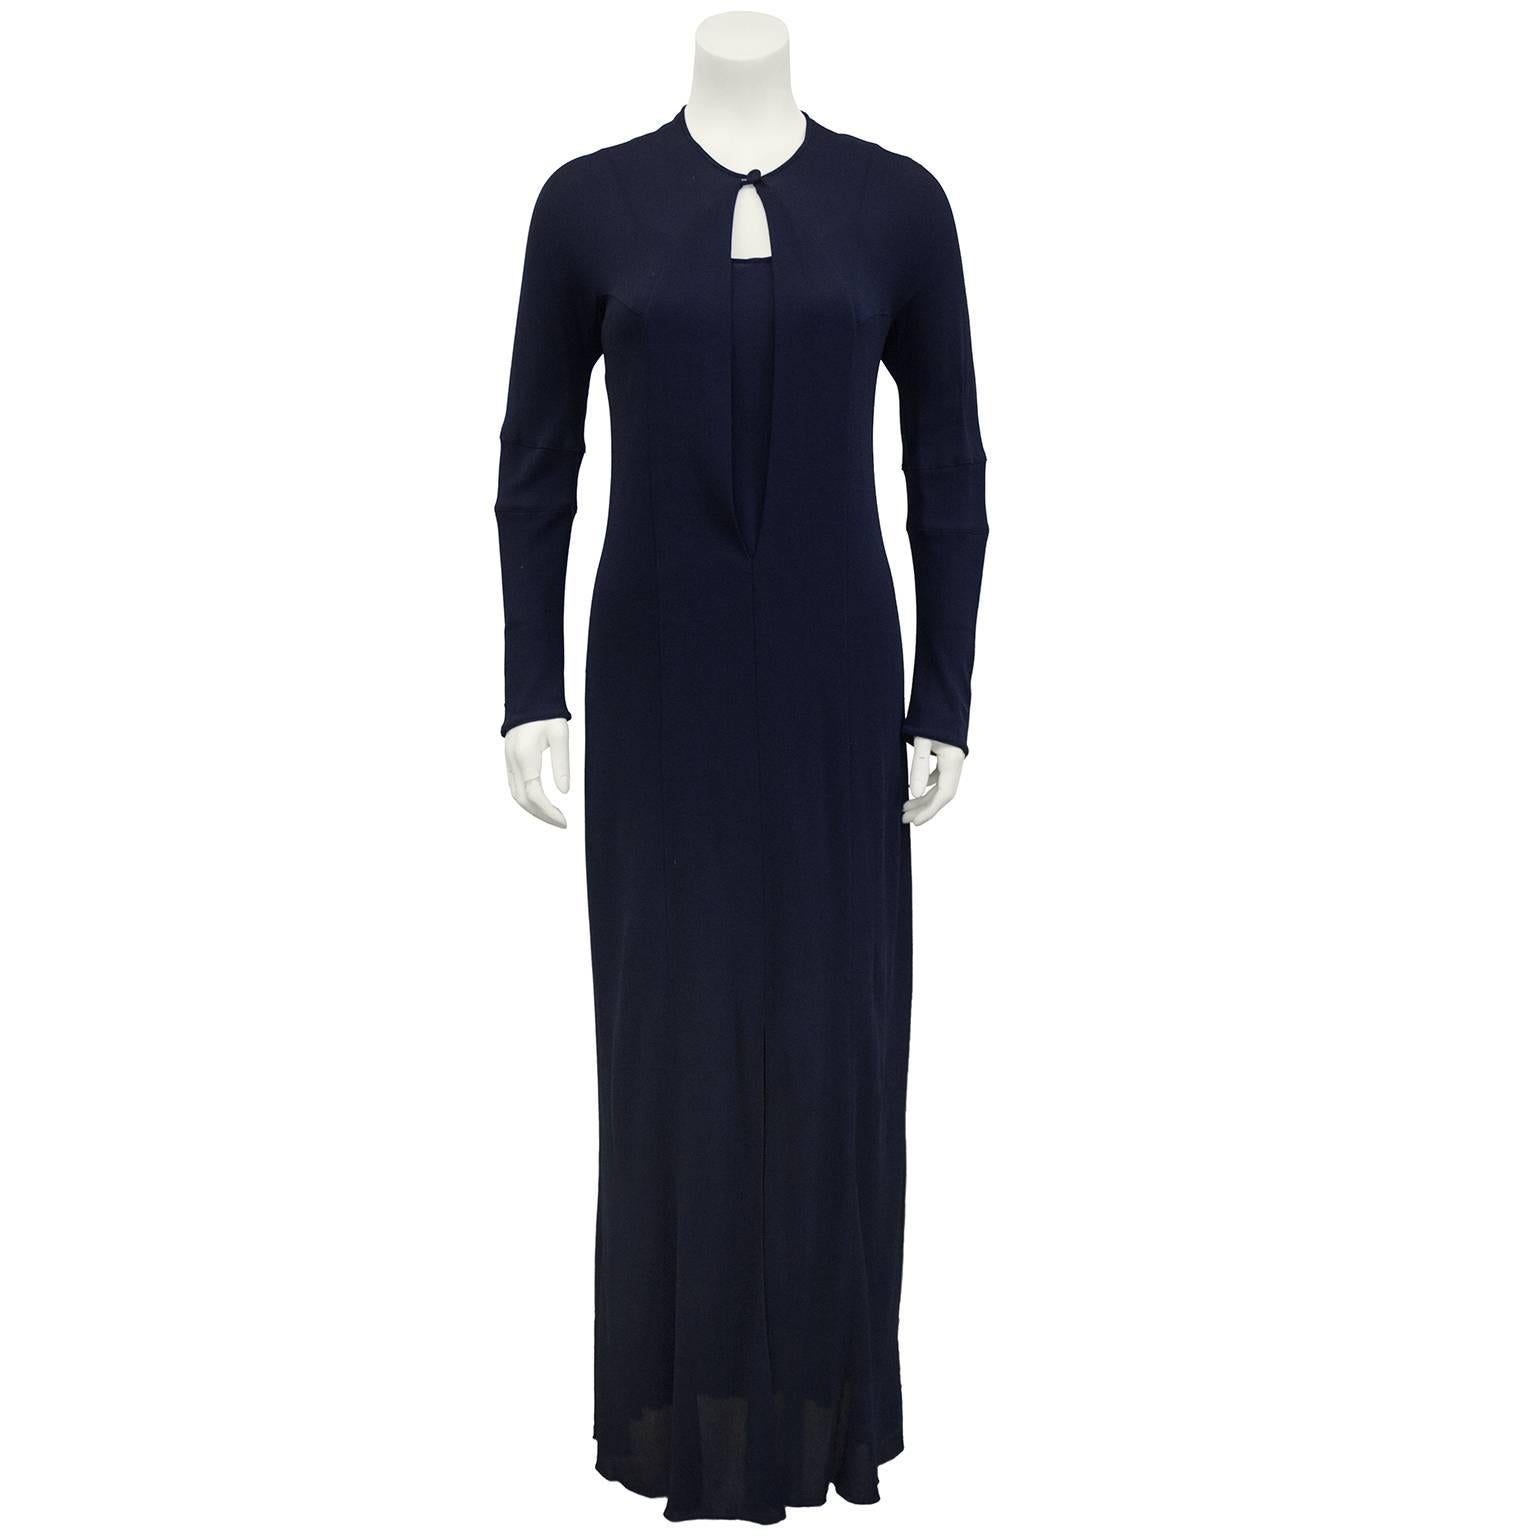 1990s Karl Lagerfeld navy blue jersey gown ensemble. Featuring a mini slip dress under a long sleeve gown with a large key hole at bust finished off with a single button closure. Excellent vintage condition. Fits like a US 4. 

Sleeve 22